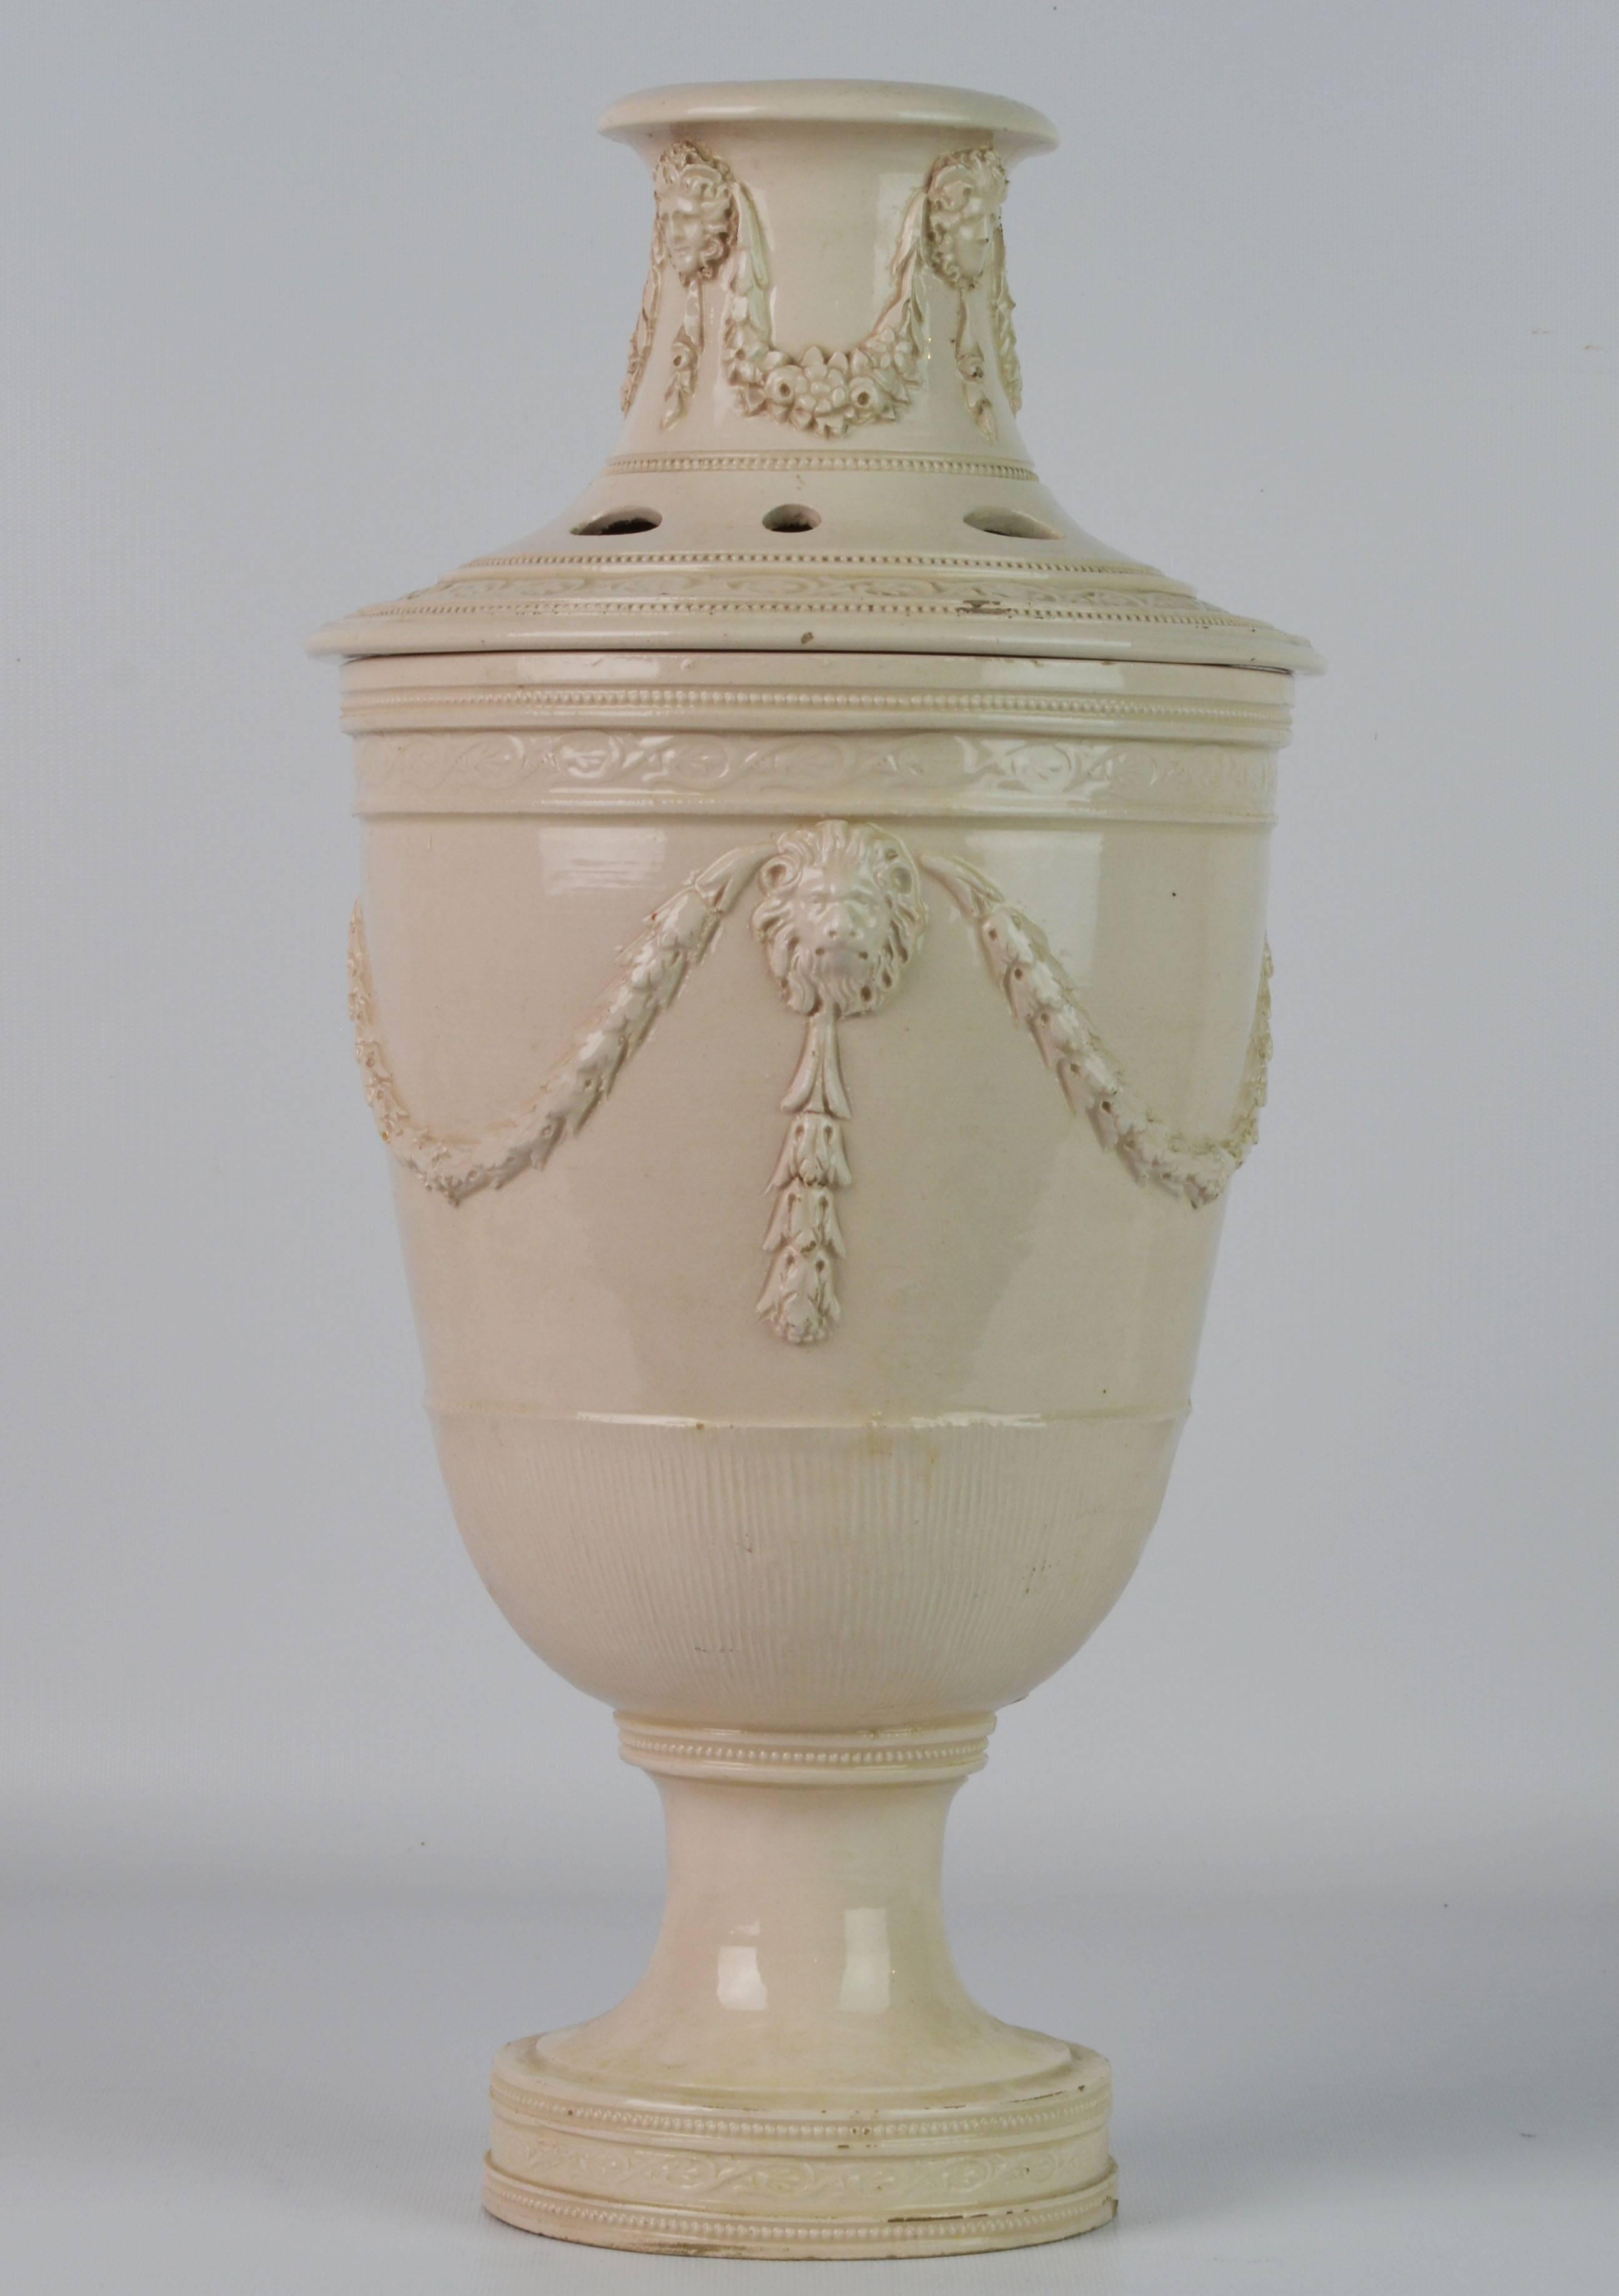 Standing 16 inches tall this rare piece of Leeds creamware in the Georgian style (reminiscent of Louis XVI style) consists of the reticulated cover surmounted by an open neck with garlands and masks in relief above the main body similarly decorated